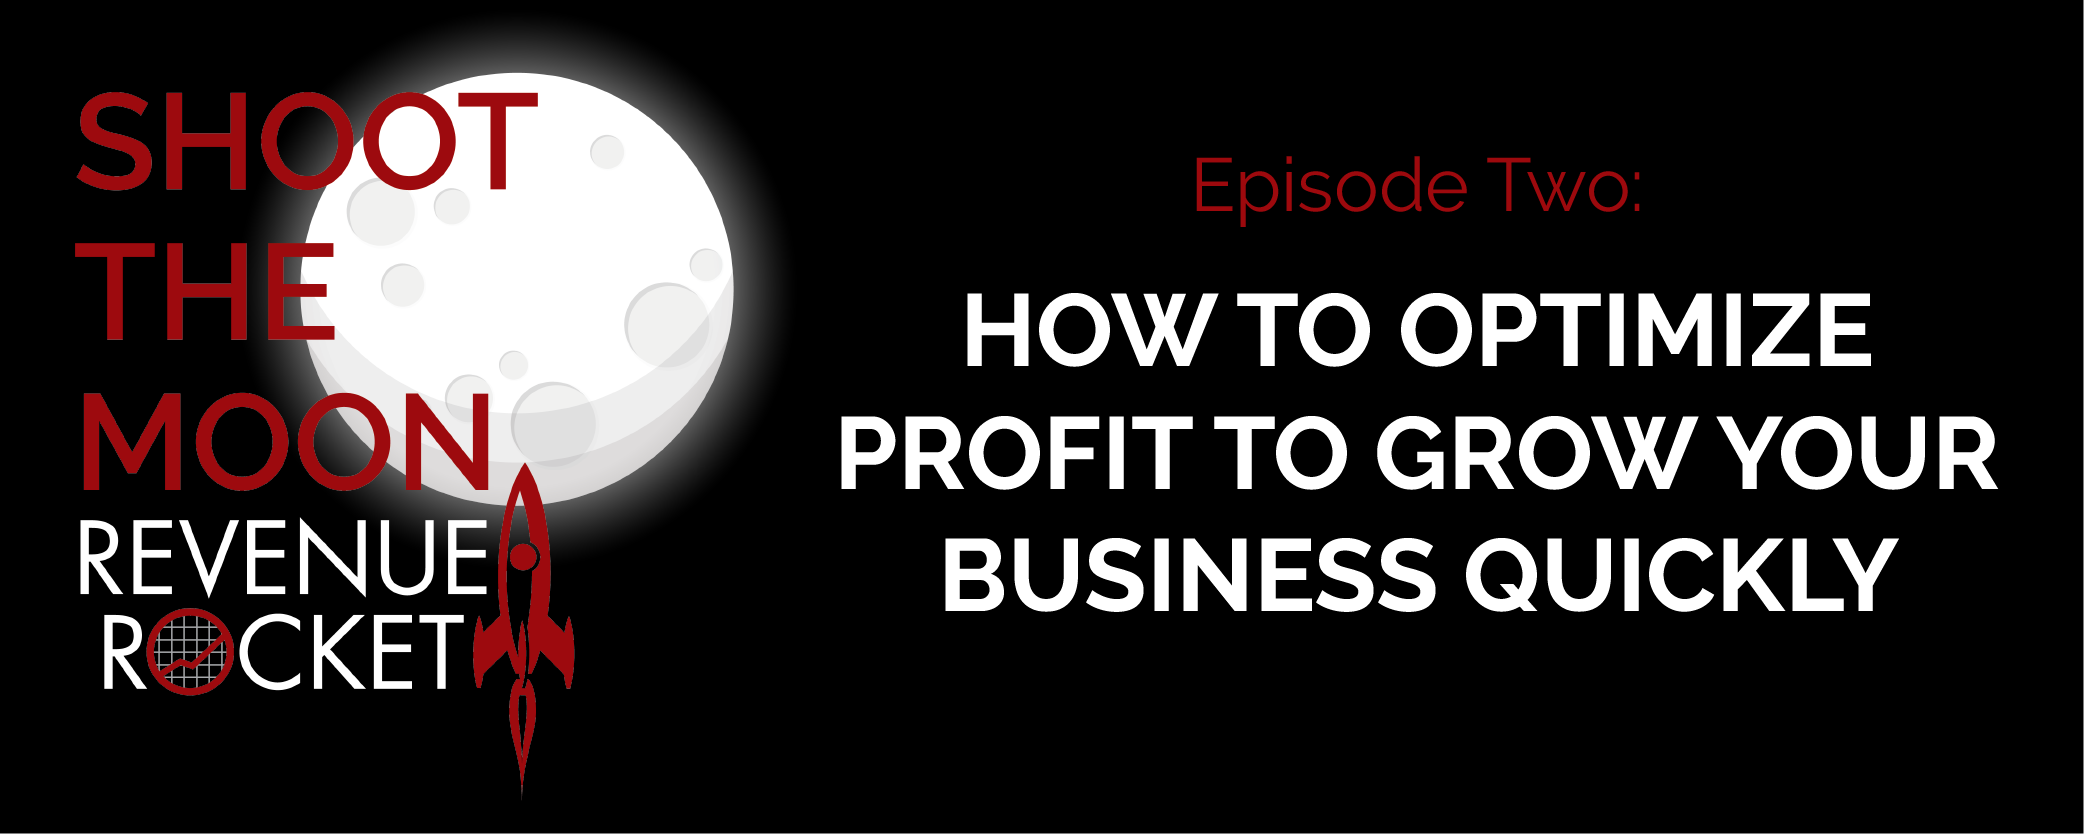 How to optimize profit to grow your business quickly